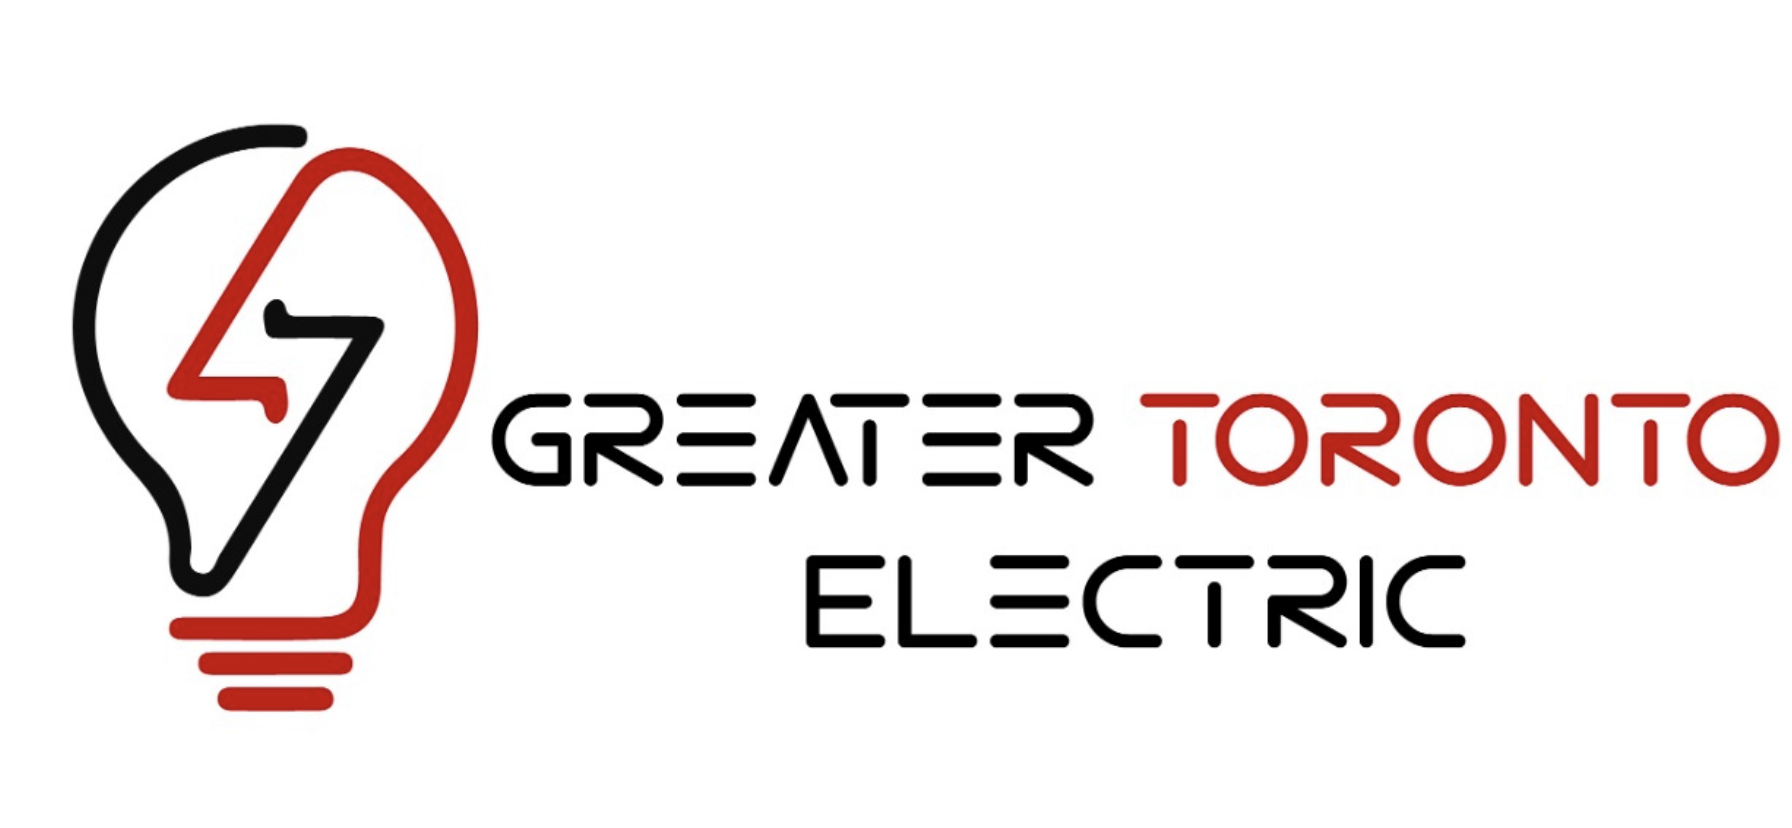 Greater Toronto Electric's logo